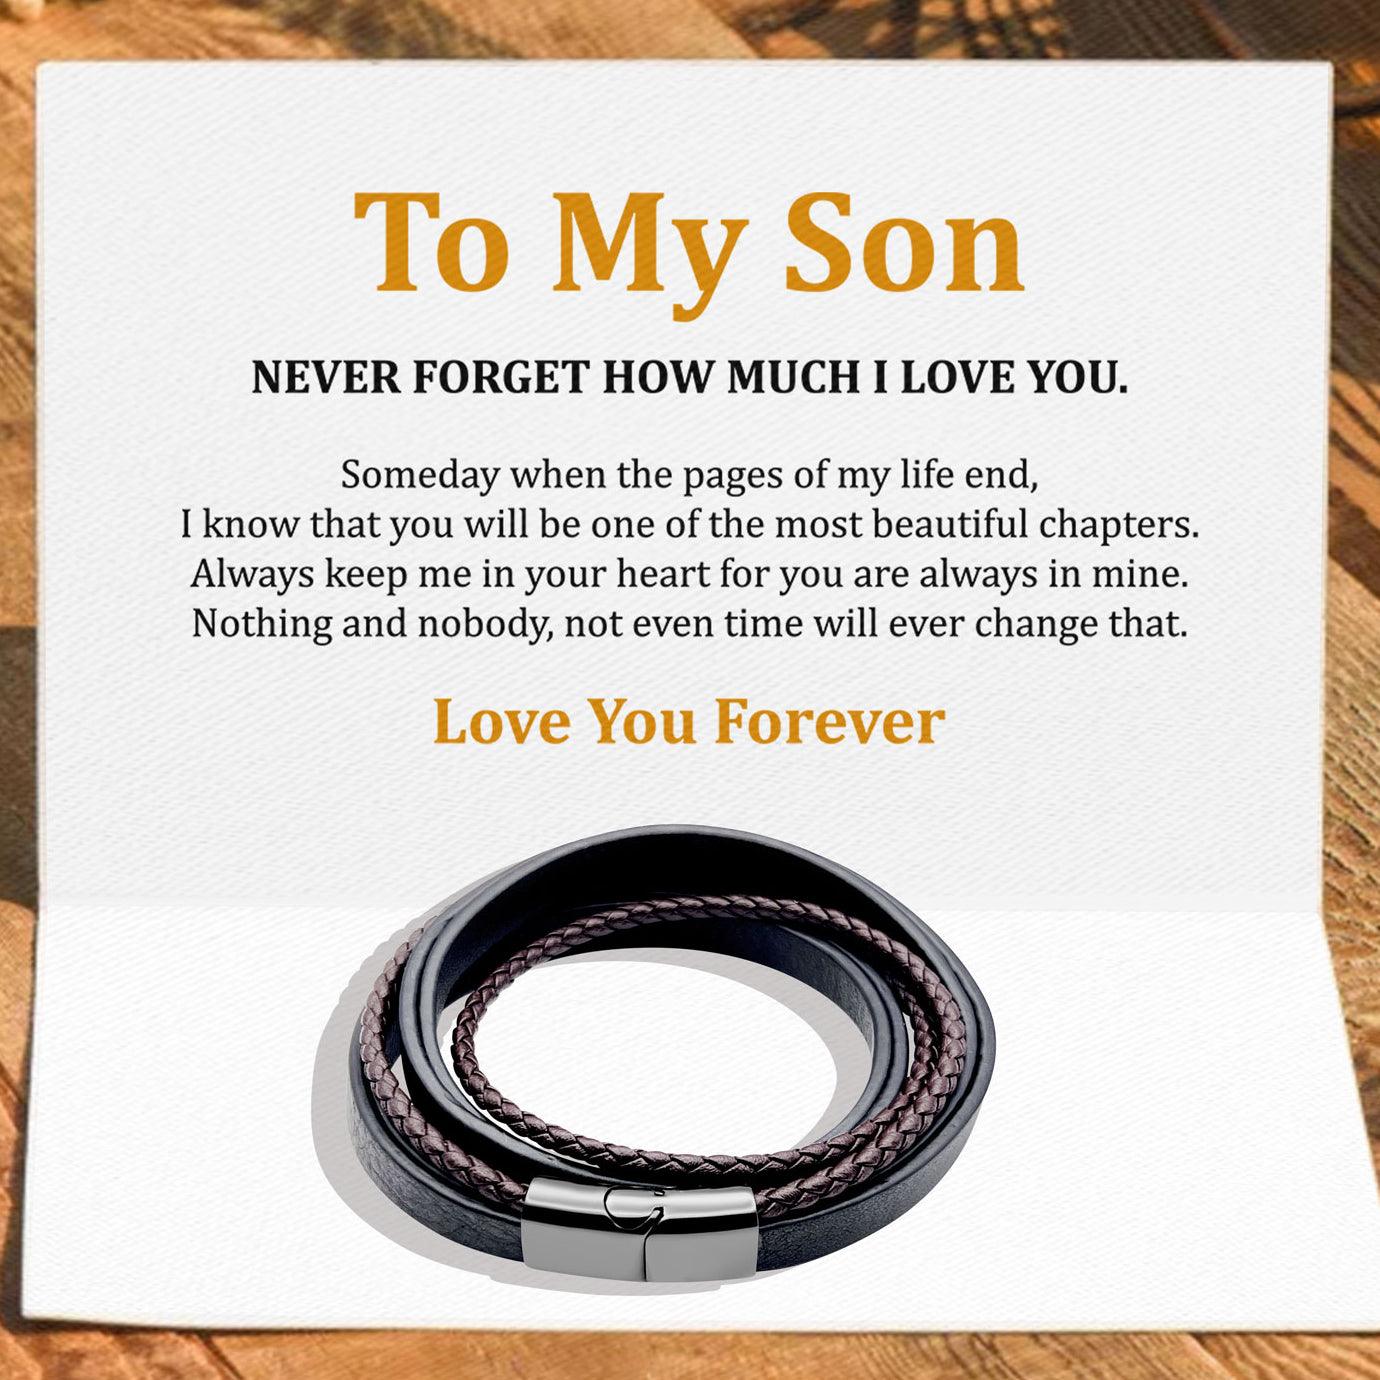 To My Son - Never Forget How Much I love You - Premium Stainless Steel Italian Leather Braided Two-Tone Layer Bracelet for Men - TRYNDI